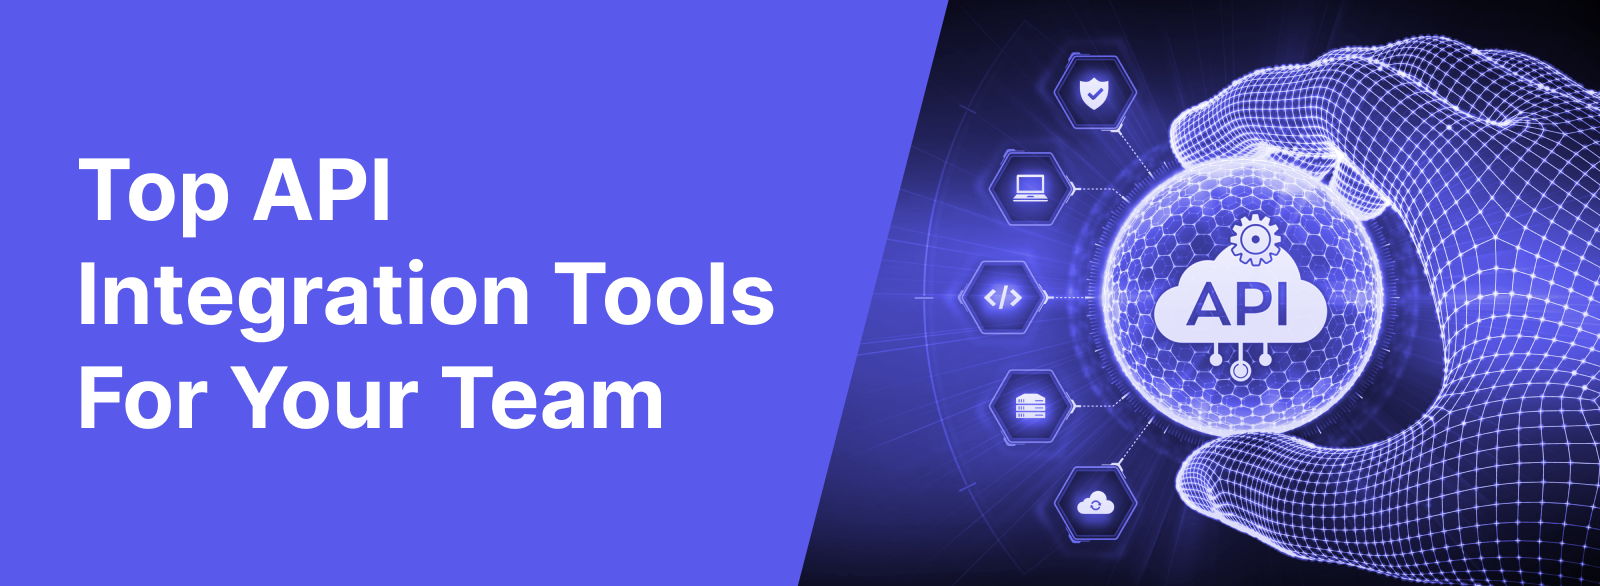 Top API Integration Tools for your team